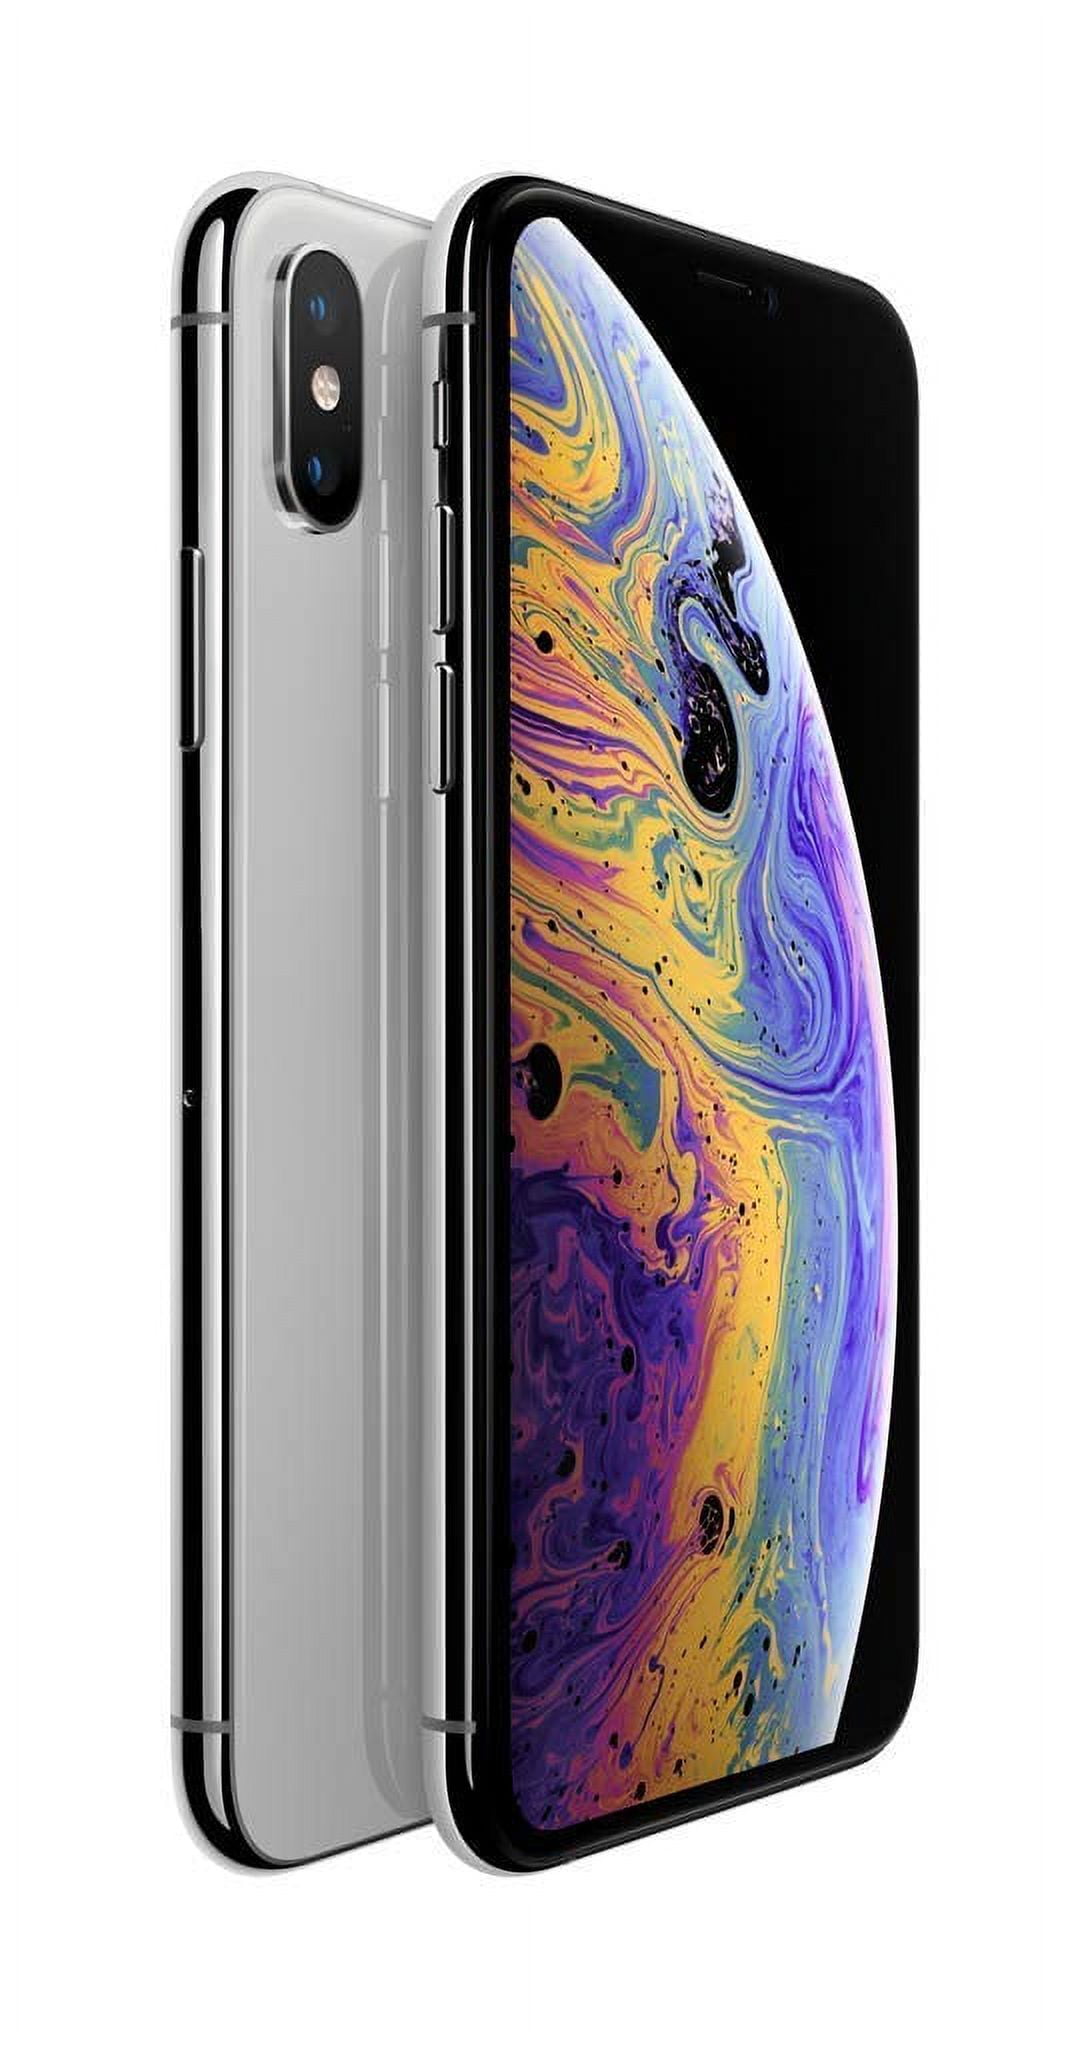 Restored Apple iPhone XS 256GB Silver LTE Cellular T-Mobile MTA82LL/A  (Refurbished)